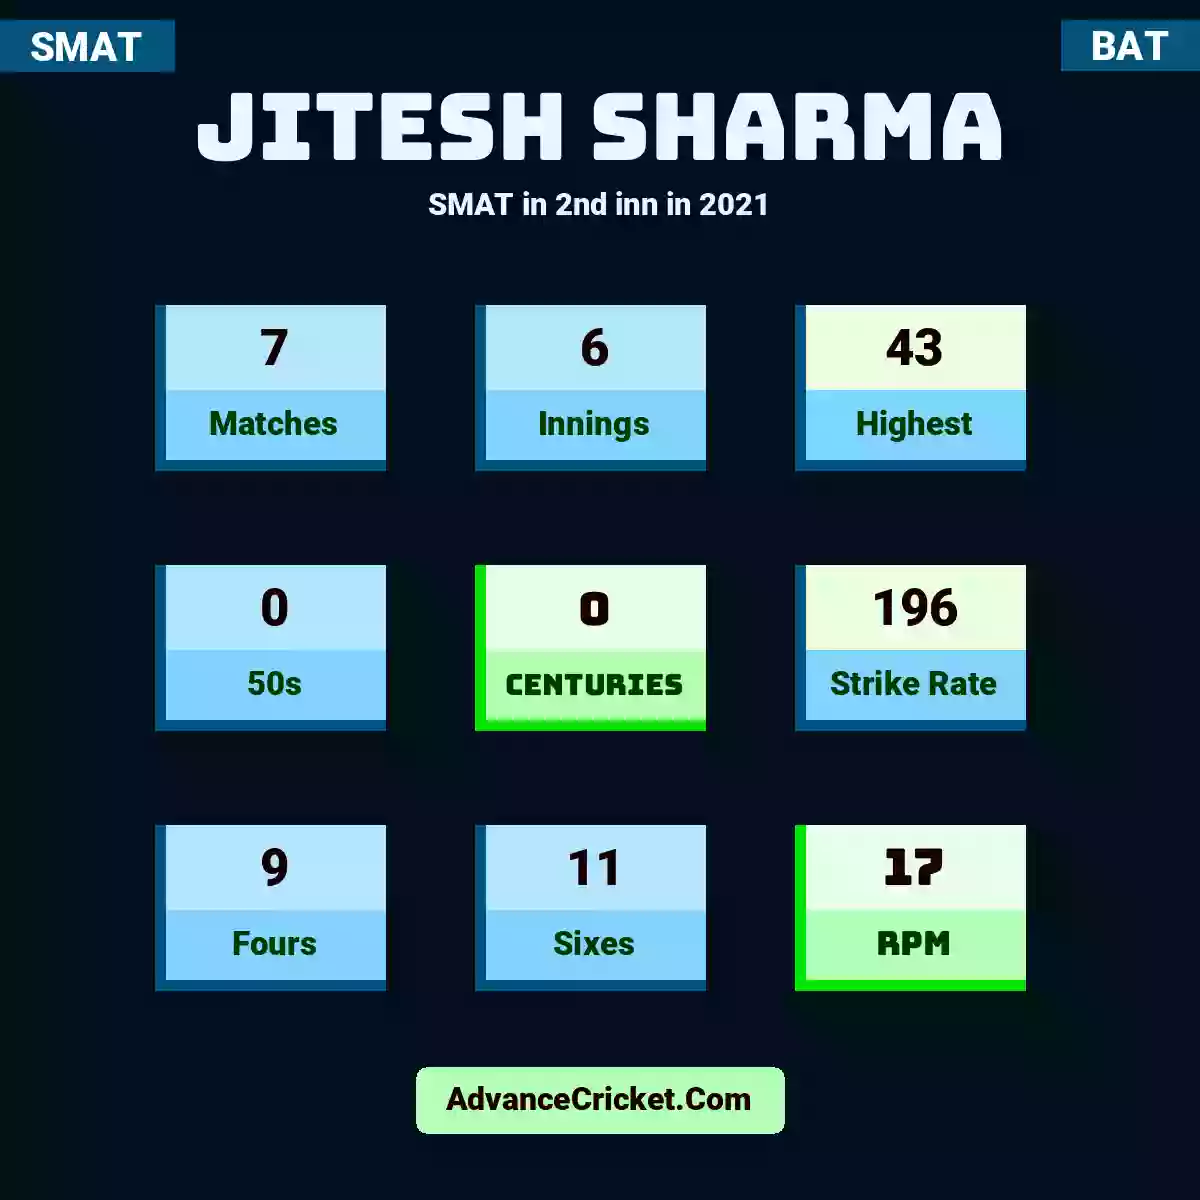 Jitesh Sharma SMAT  in 2nd inn in 2021, Jitesh Sharma played 7 matches, scored 43 runs as highest, 0 half-centuries, and 0 centuries, with a strike rate of 196. J.Sharma hit 9 fours and 11 sixes, with an RPM of 17.